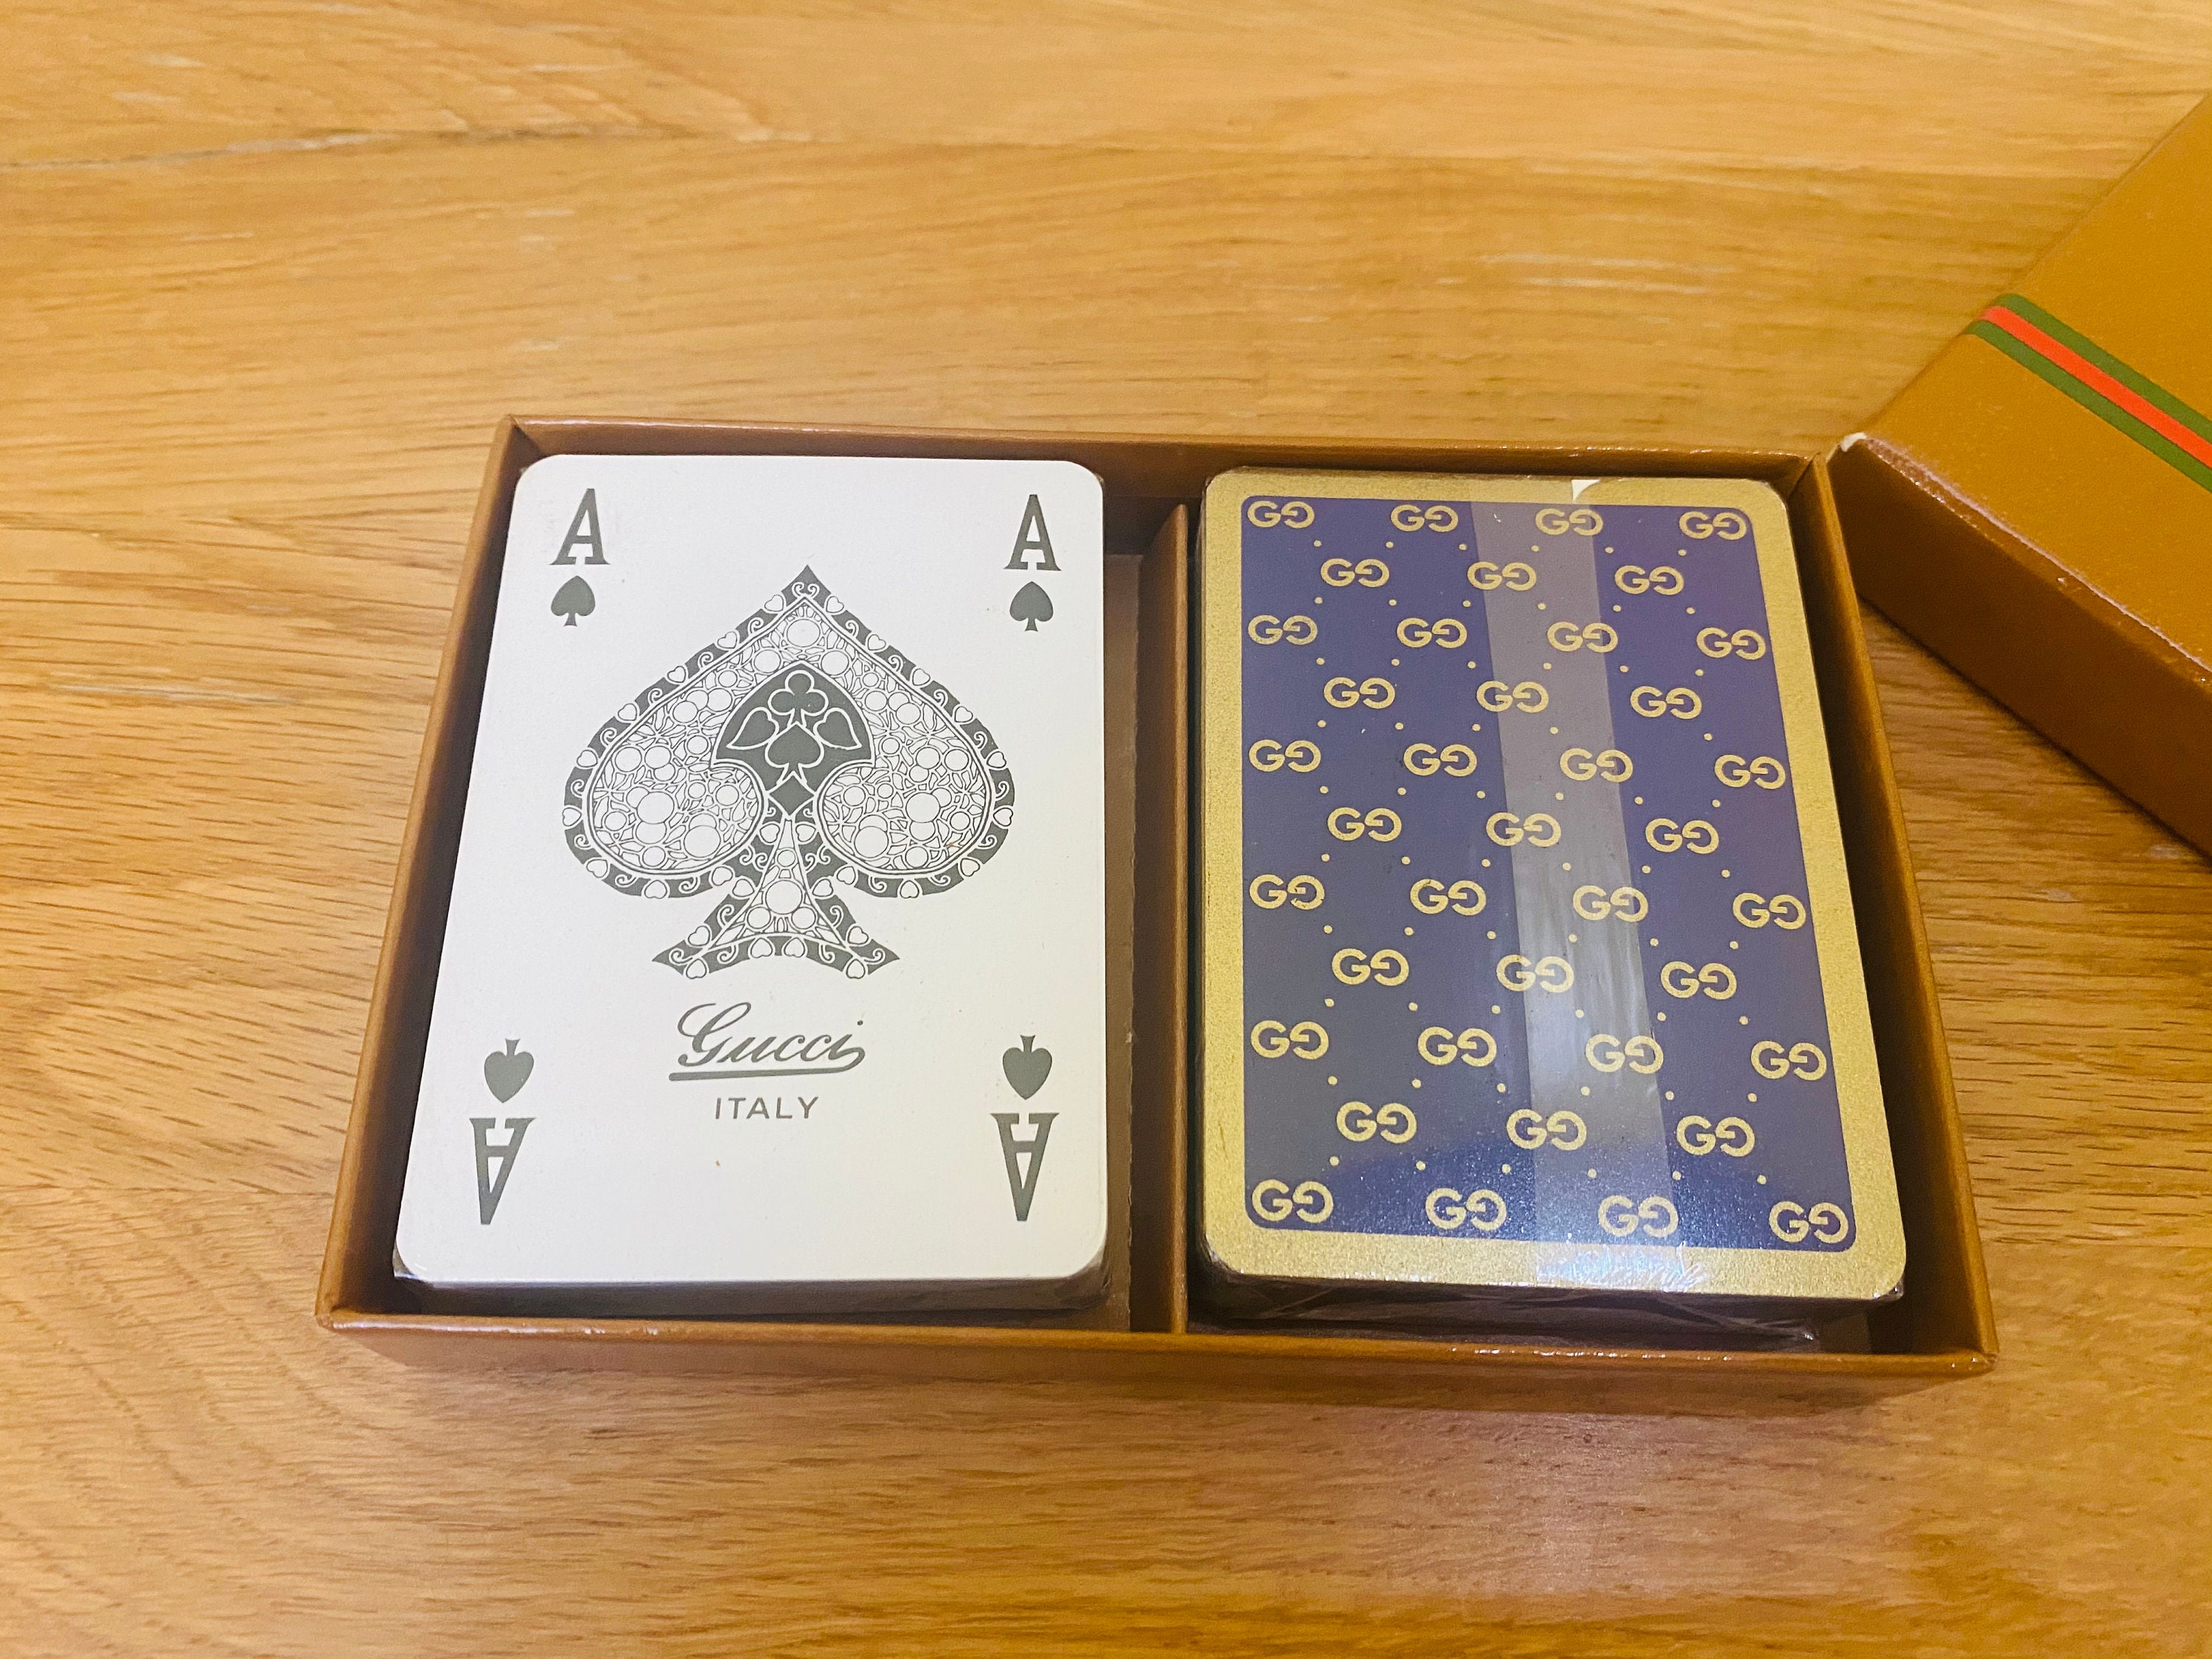 Vintage Gucci Double Deck Playing Cards In Original Case. Red And White